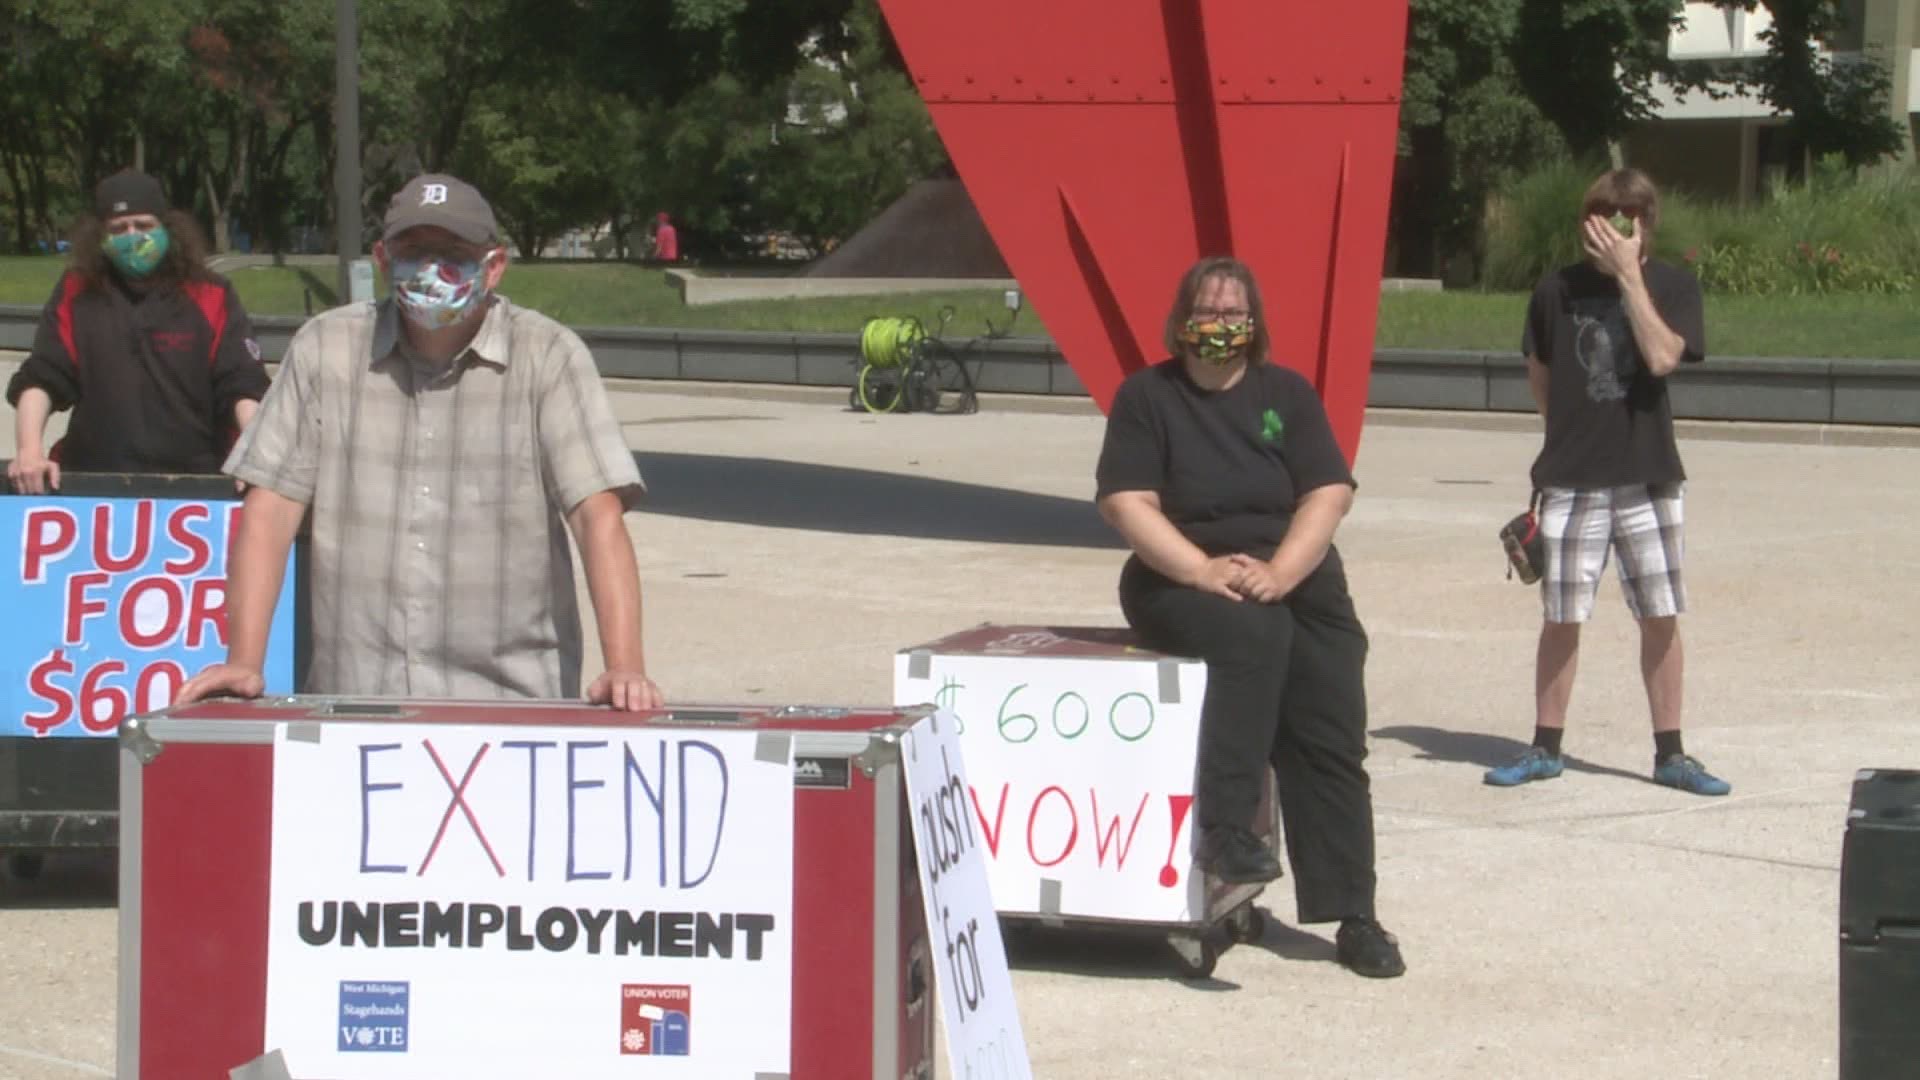 The protesters want the $600 federal unemployment benefits, which expired last week, to be continued.